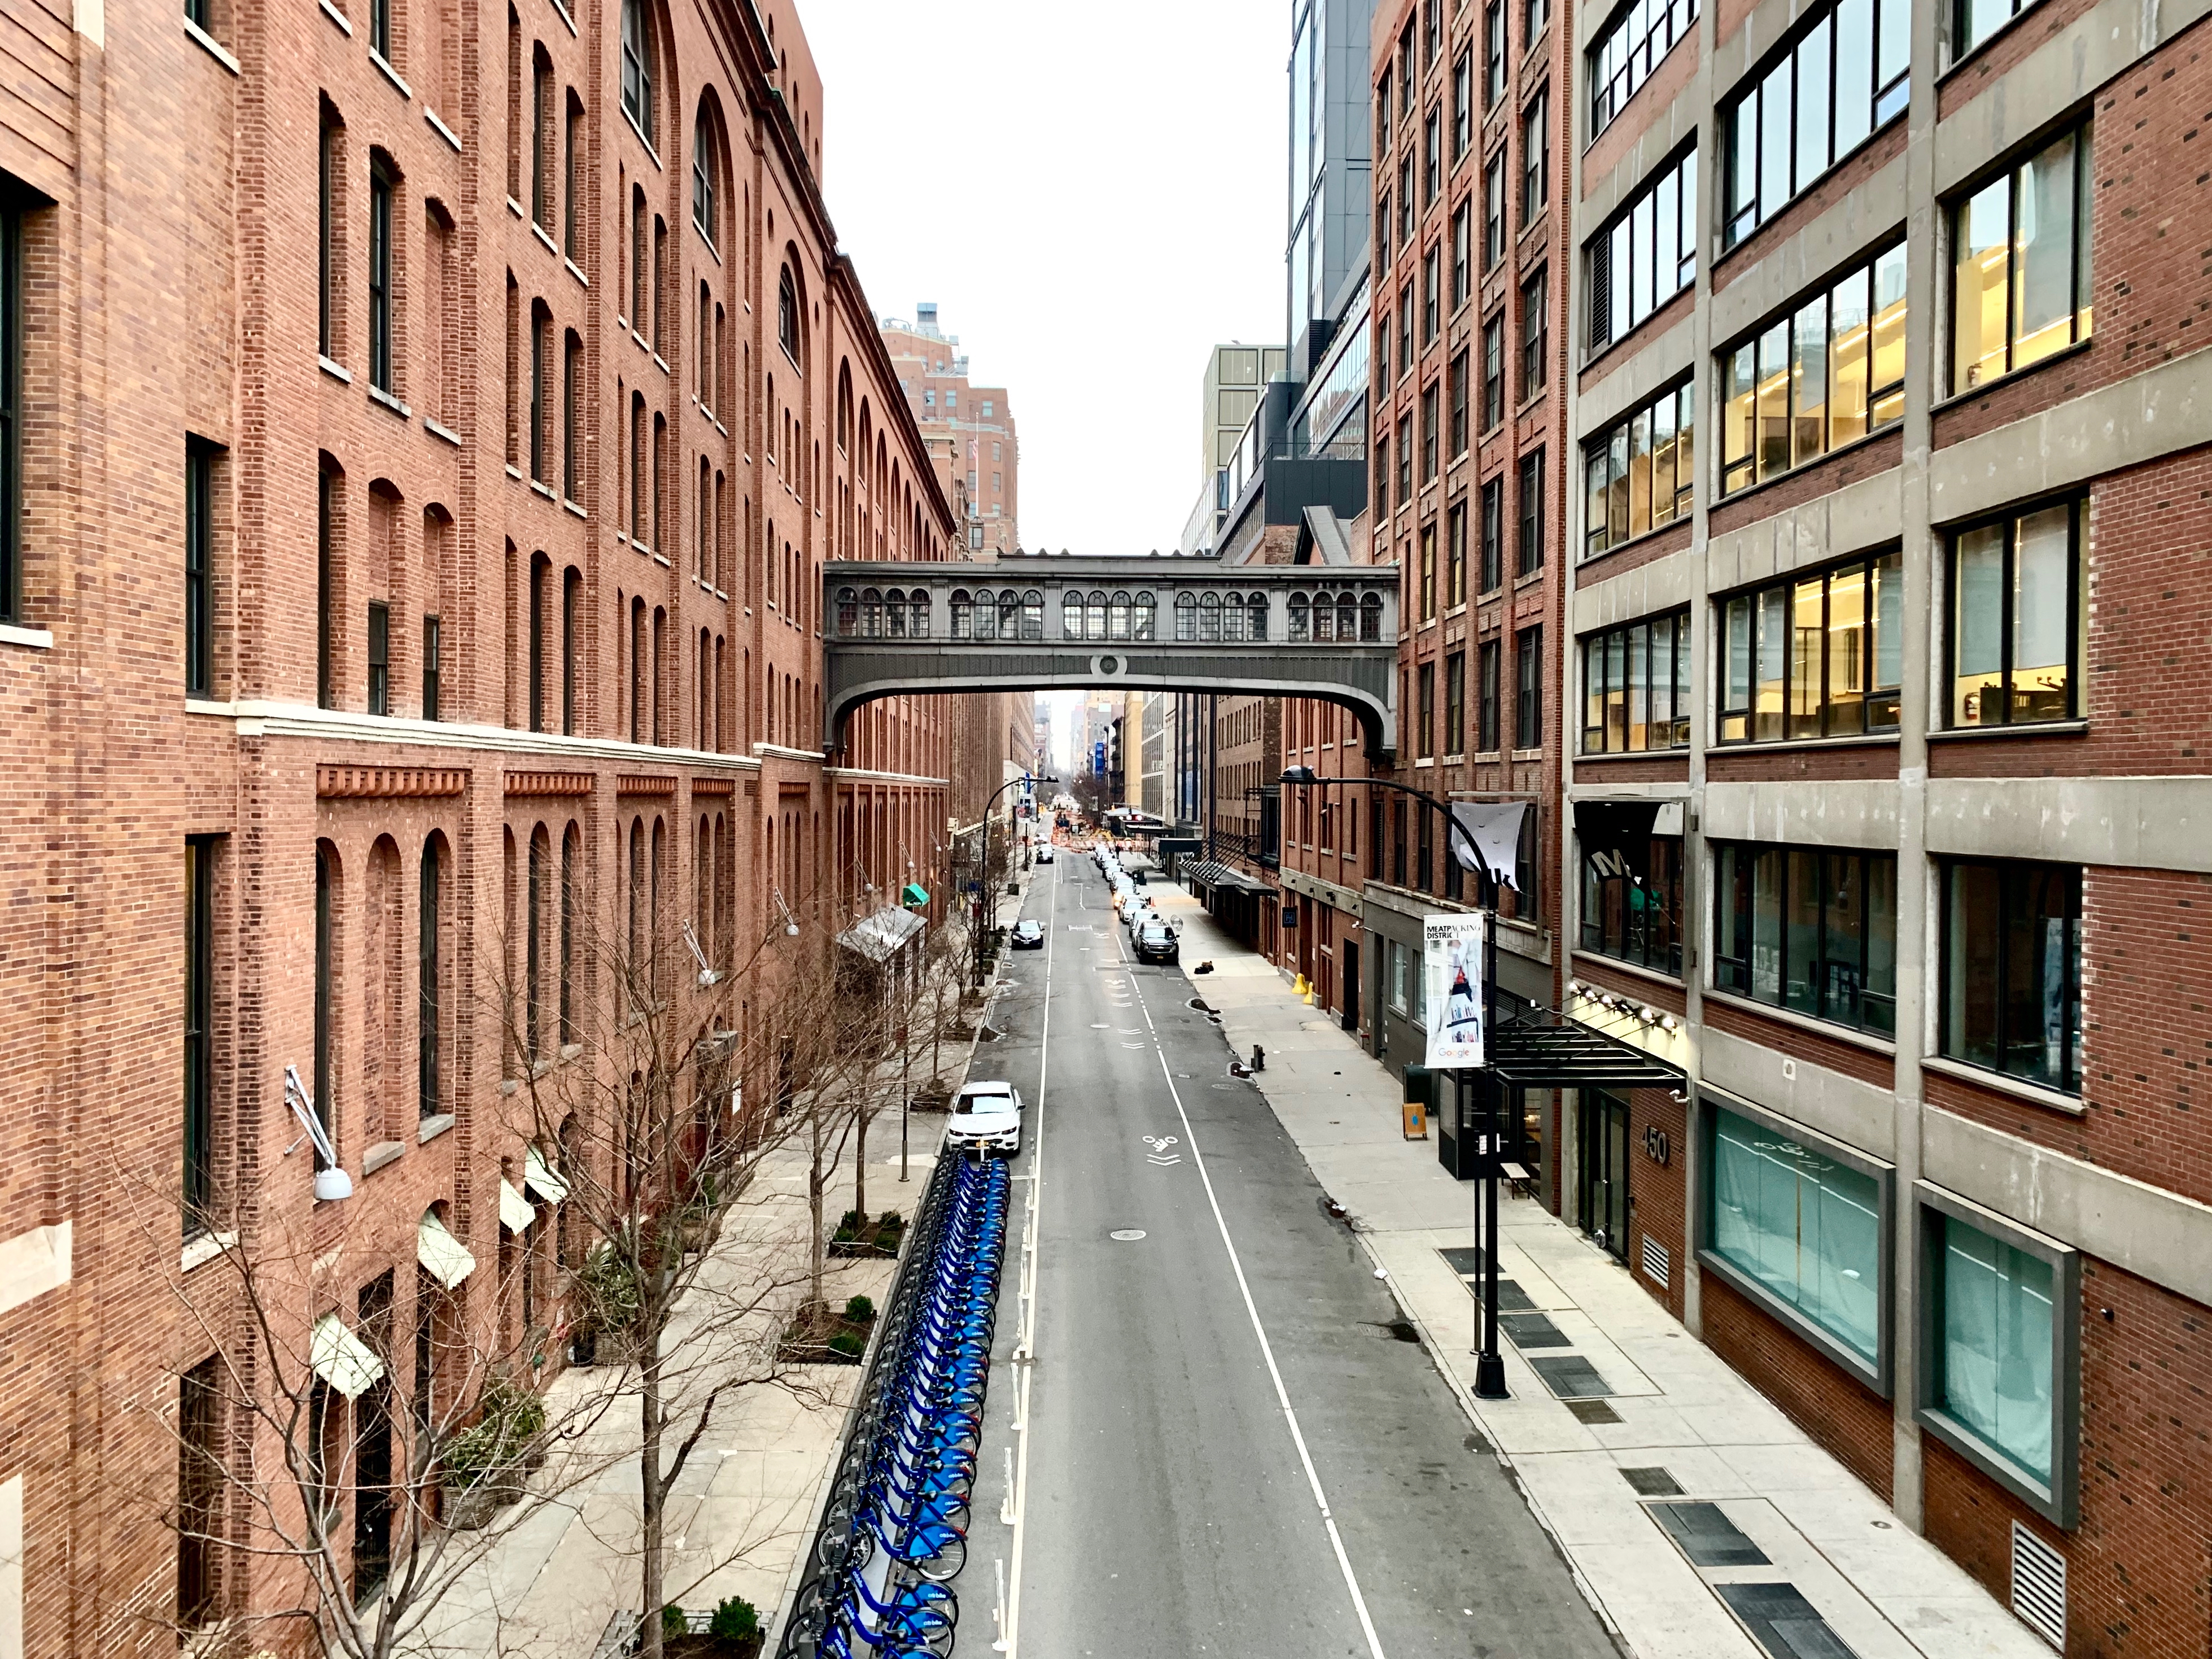 A quiet morning in the Meatpacking District. This street is home to the <a href="http://chelseamarket.com/">Chelsea Market</a>, <a href="https://bluebottlecoffee.com/cafes/chelsea">Blue Bottle</a>, and <a href="https://www.meatpacking-district.com/places/google-2/">Google NYC</a>.